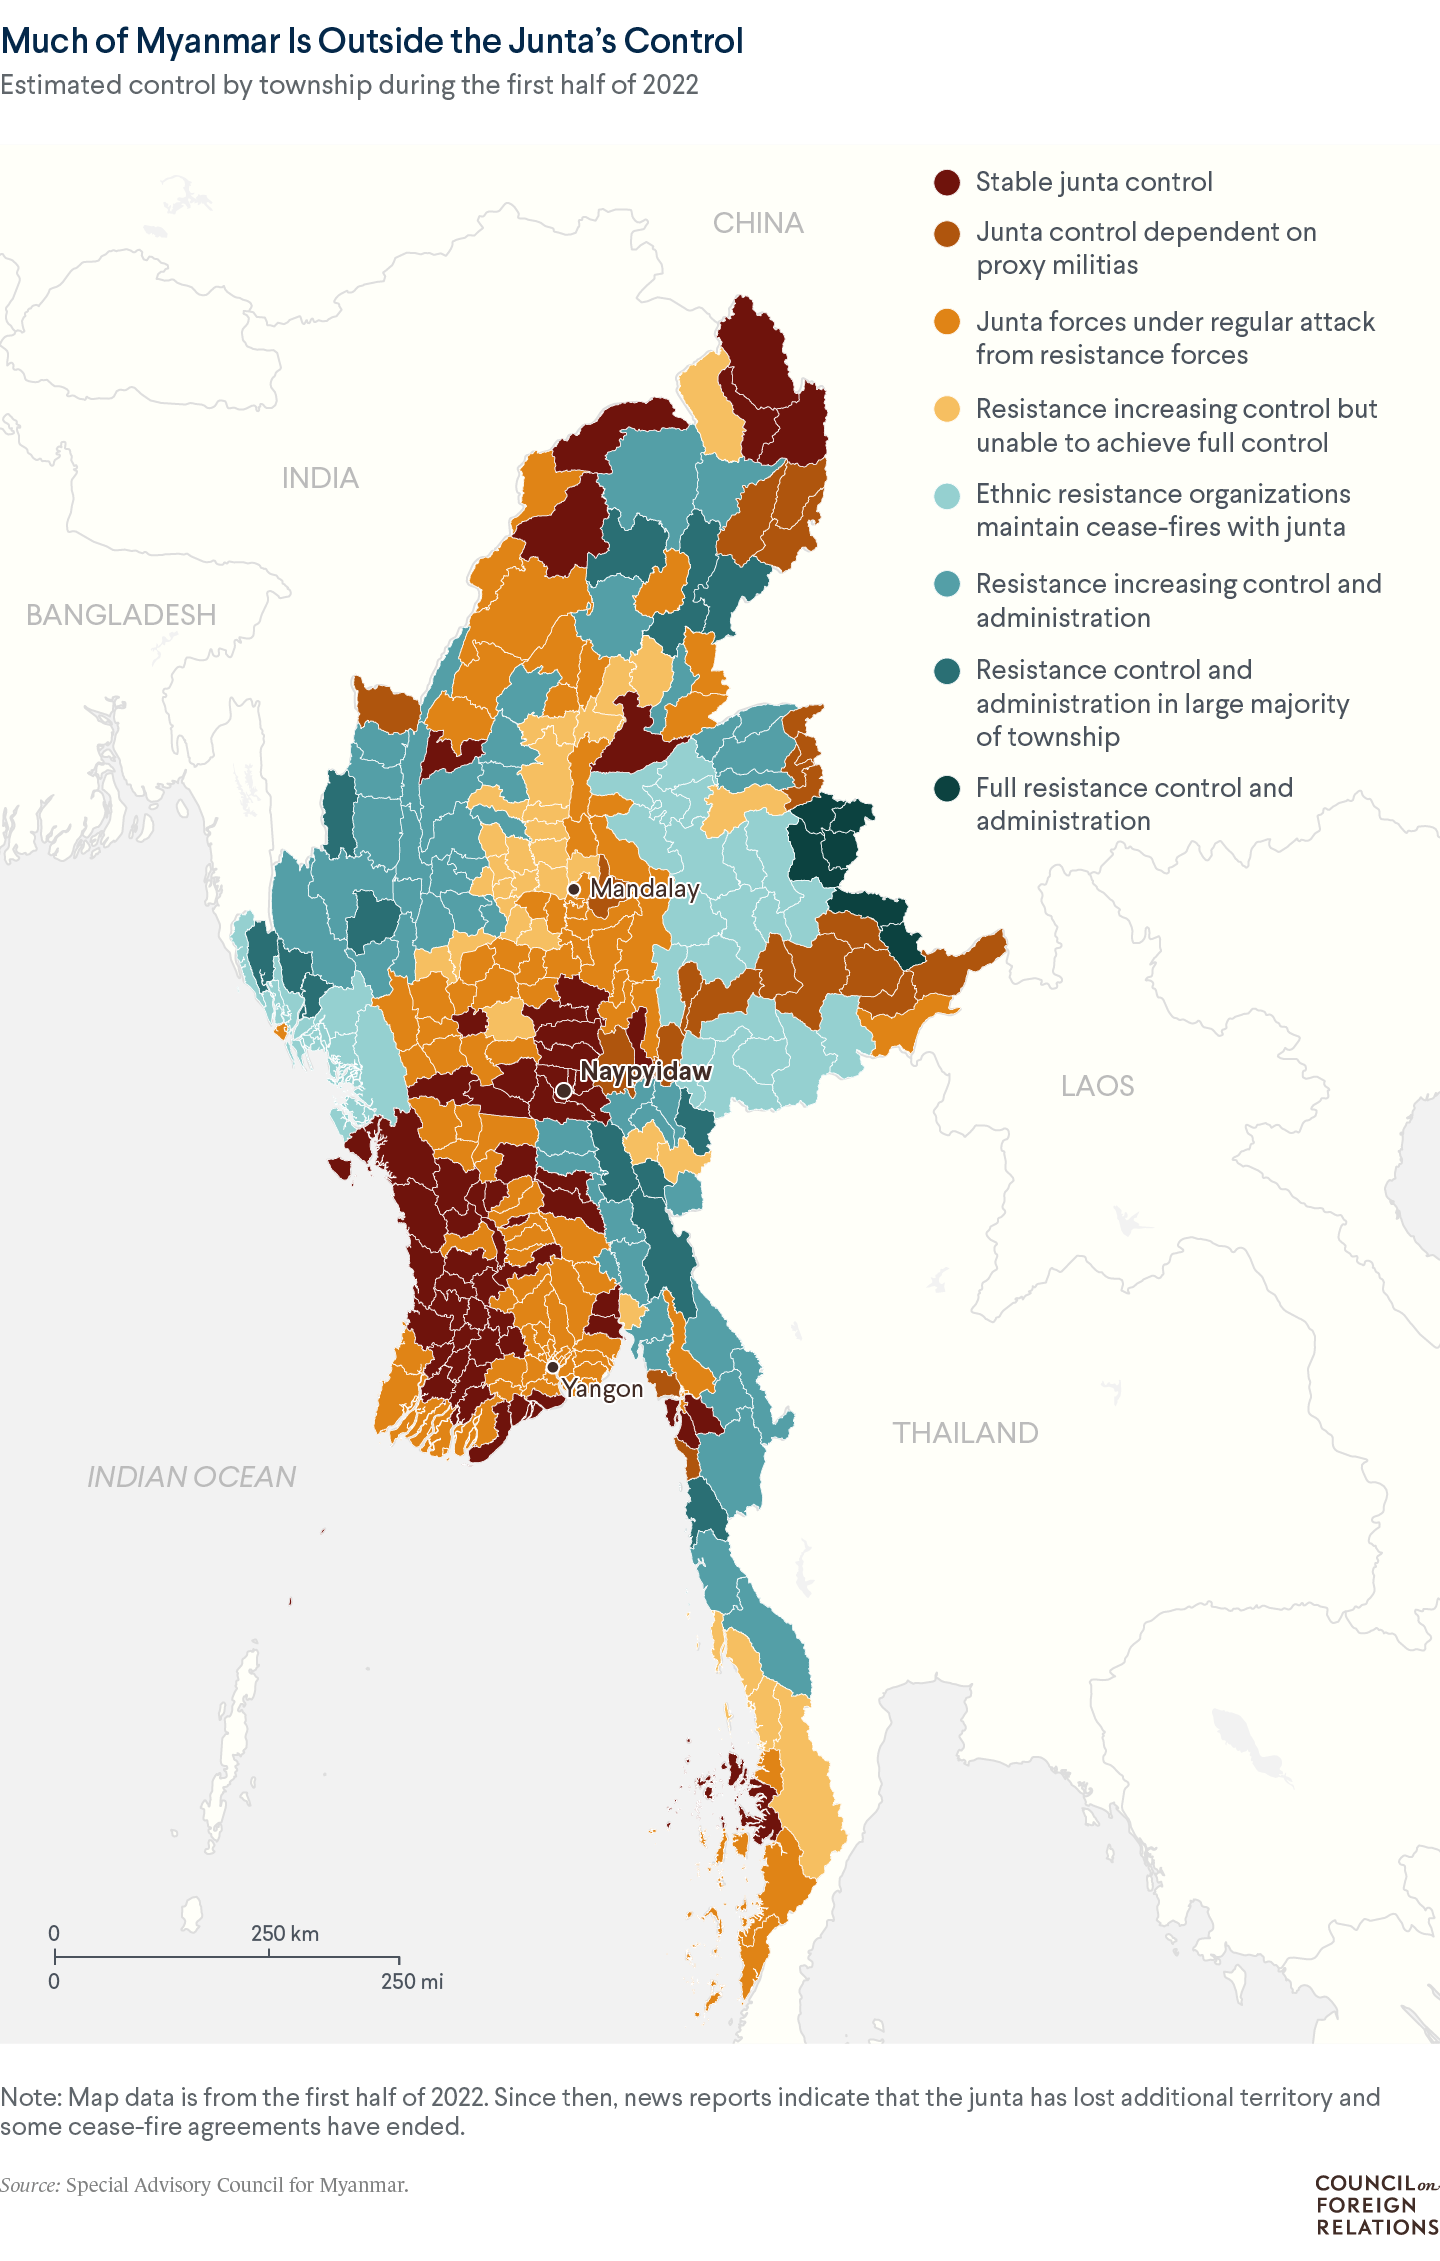 WarTorn Myanmar Plans to Hold Elections. Will They Matter? Council